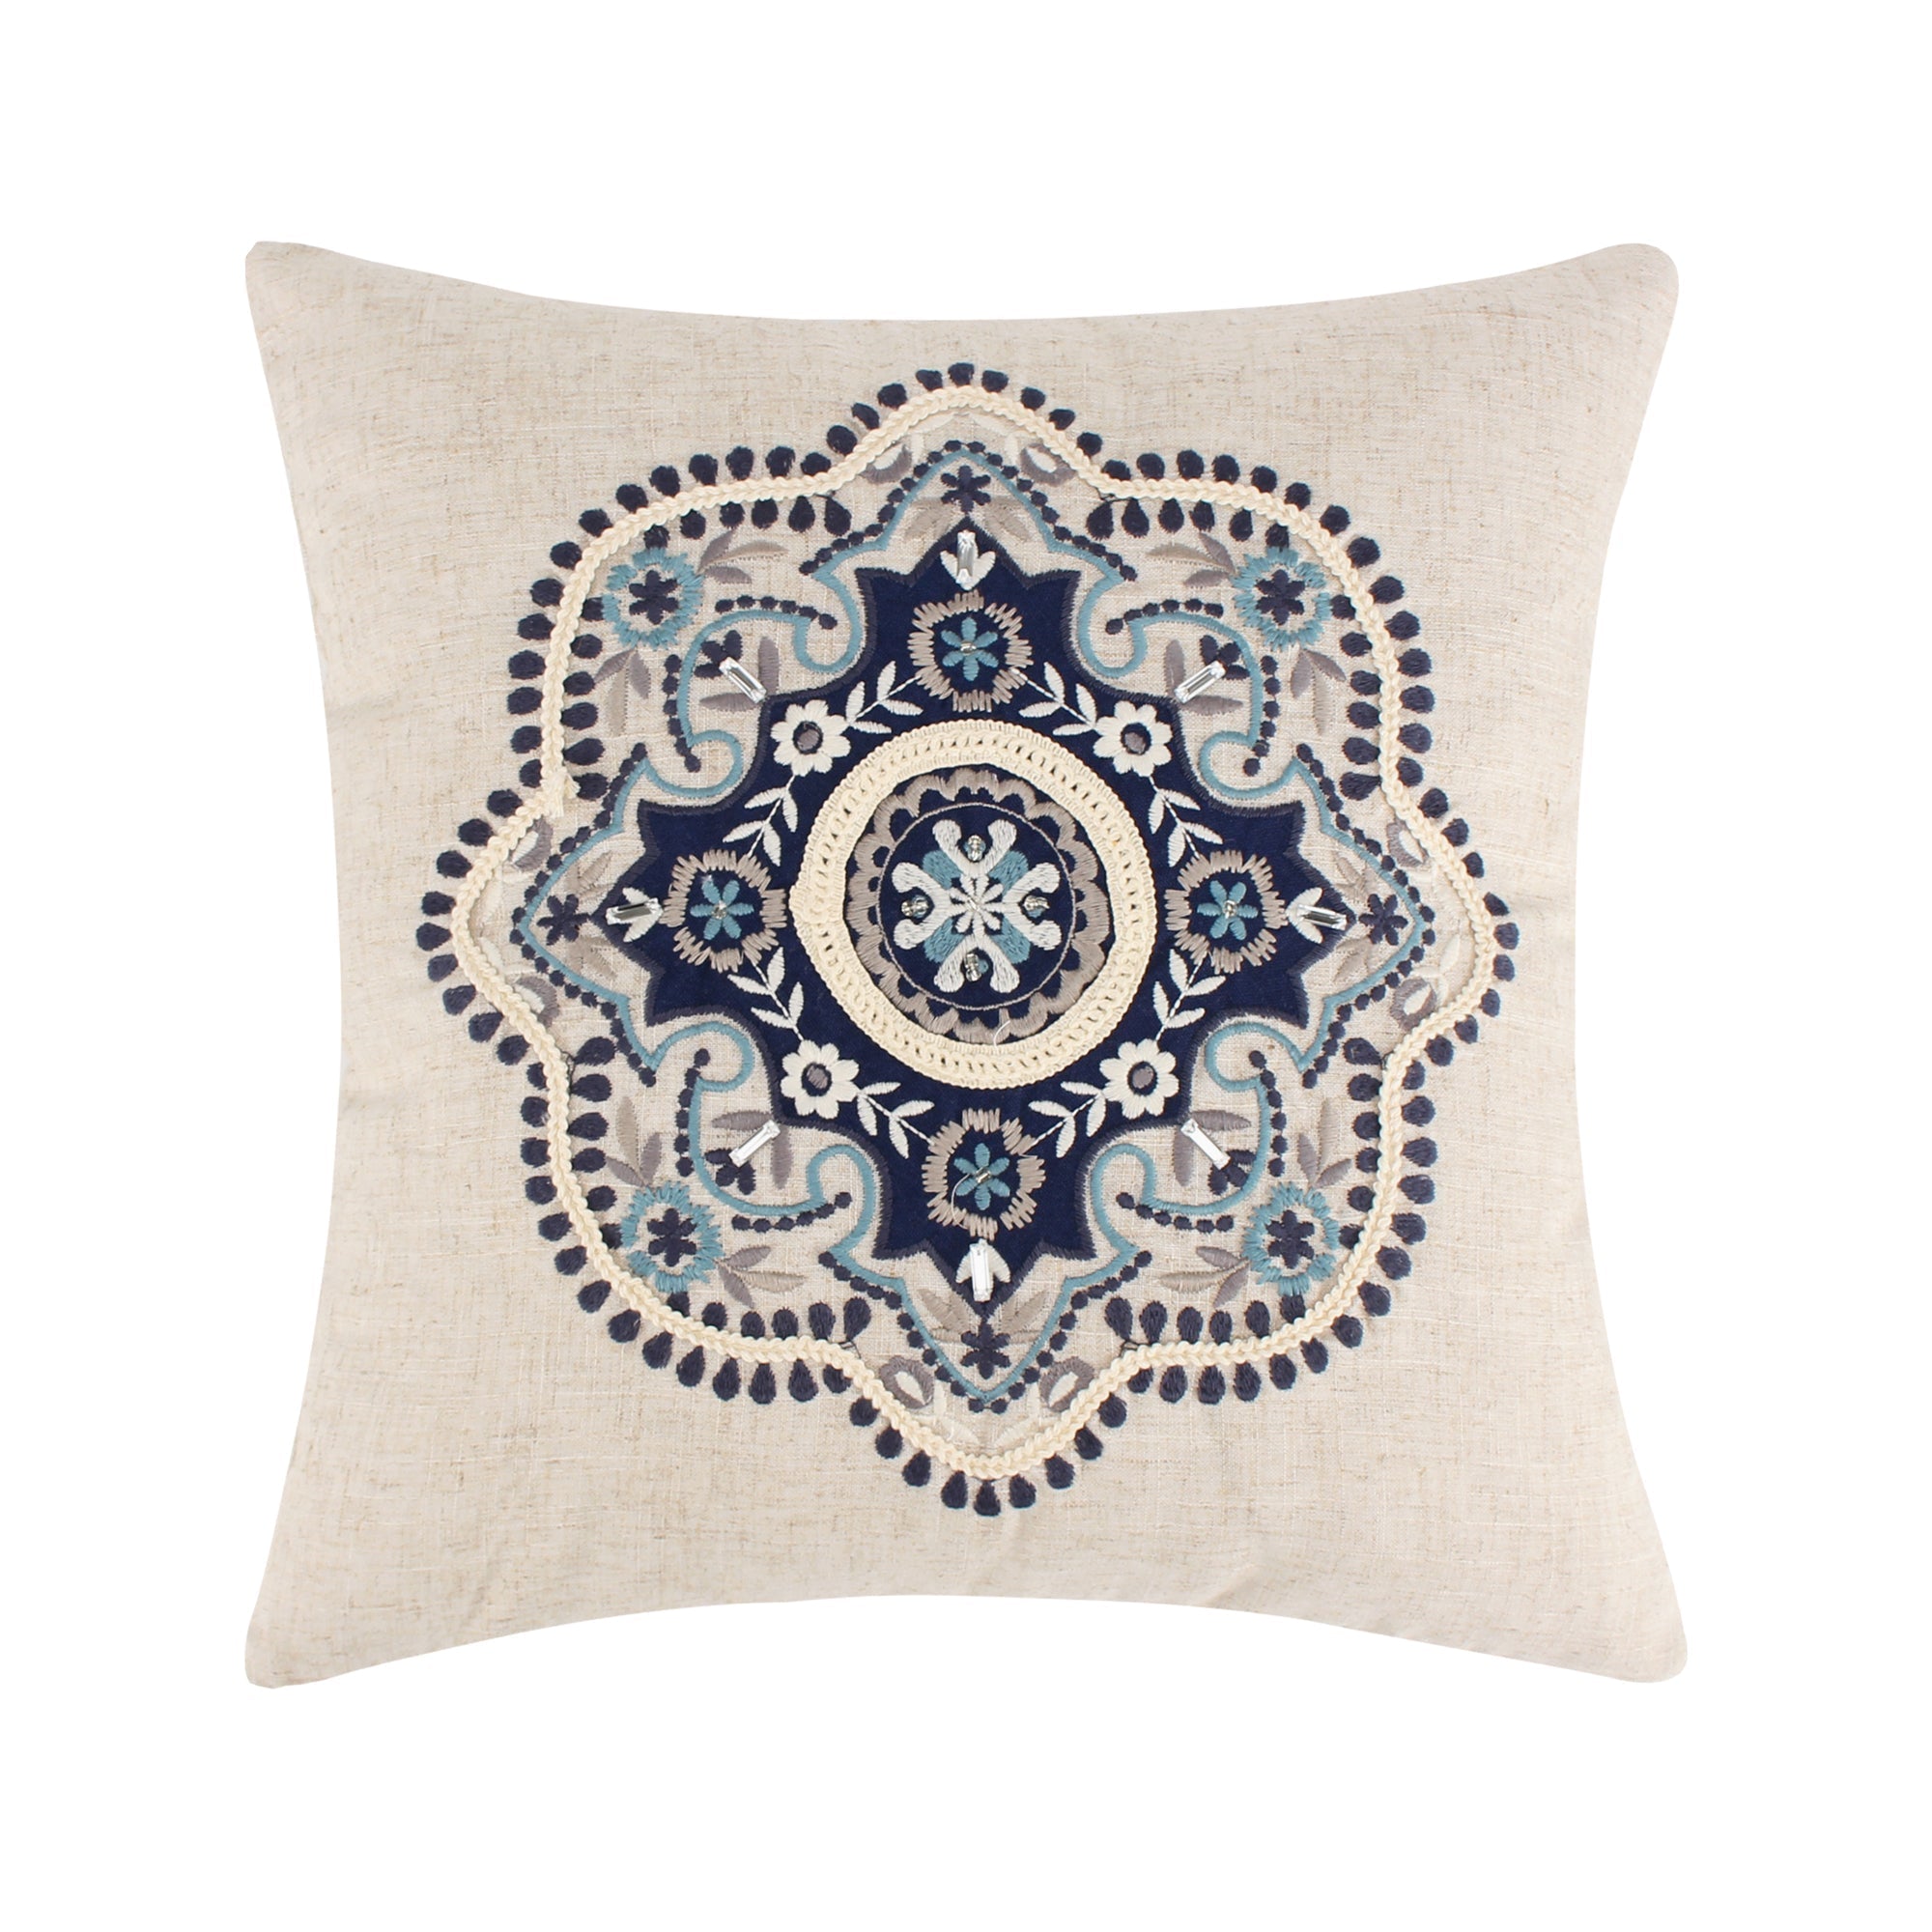 Lorrance Embroidered Medallion Pillow